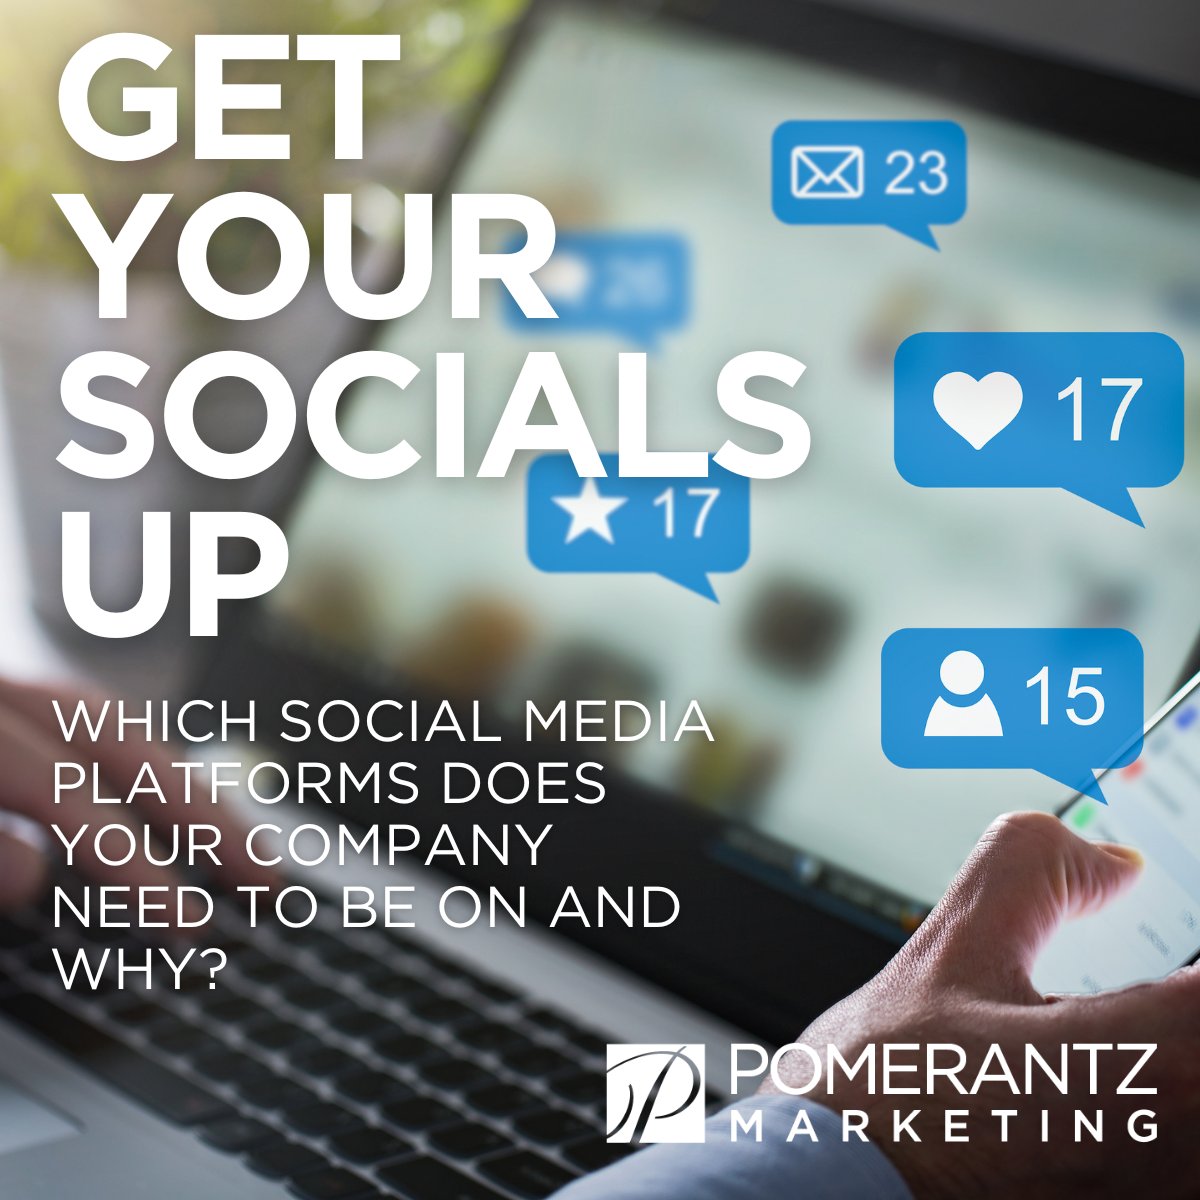 #B2Bsocialmedia strategy does not need to be a guessing game - get the #B2Bsocialmediaexperts at POM on your team and get your socials up! Ready to chat? pomagency.com

#B2Bmarketingexperts #outsourcedmarketing